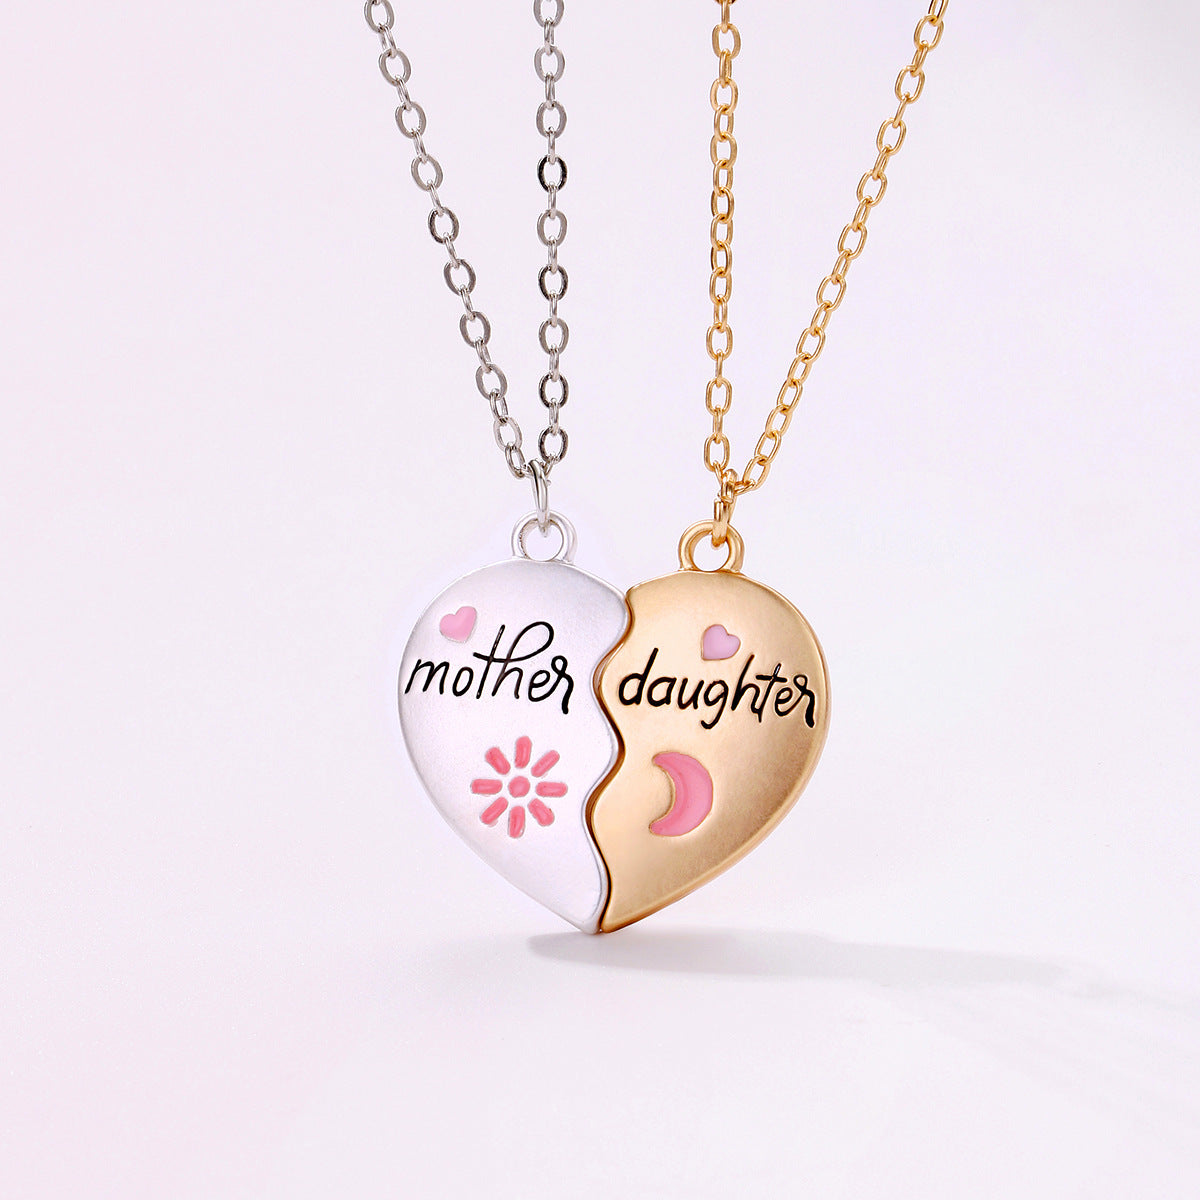 Mother Daughter Heart Pendant Necklace Set - Stylish Mother's Day Gift